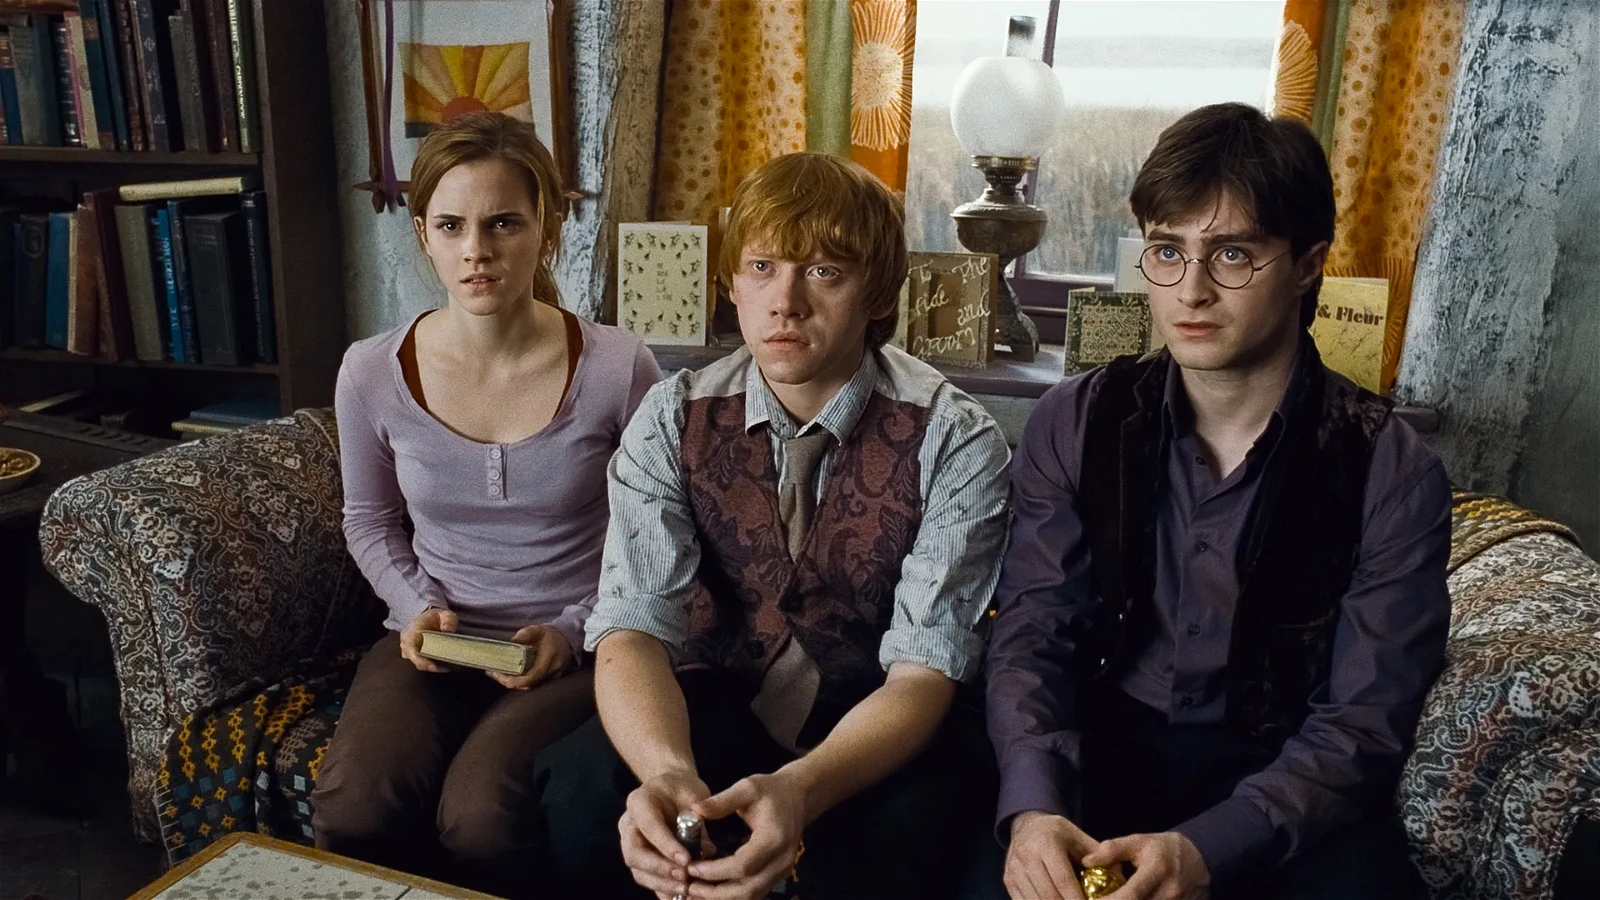  Harry Potter and the Deathly Hallows: Part 1 | Credit: Warner Bros. 